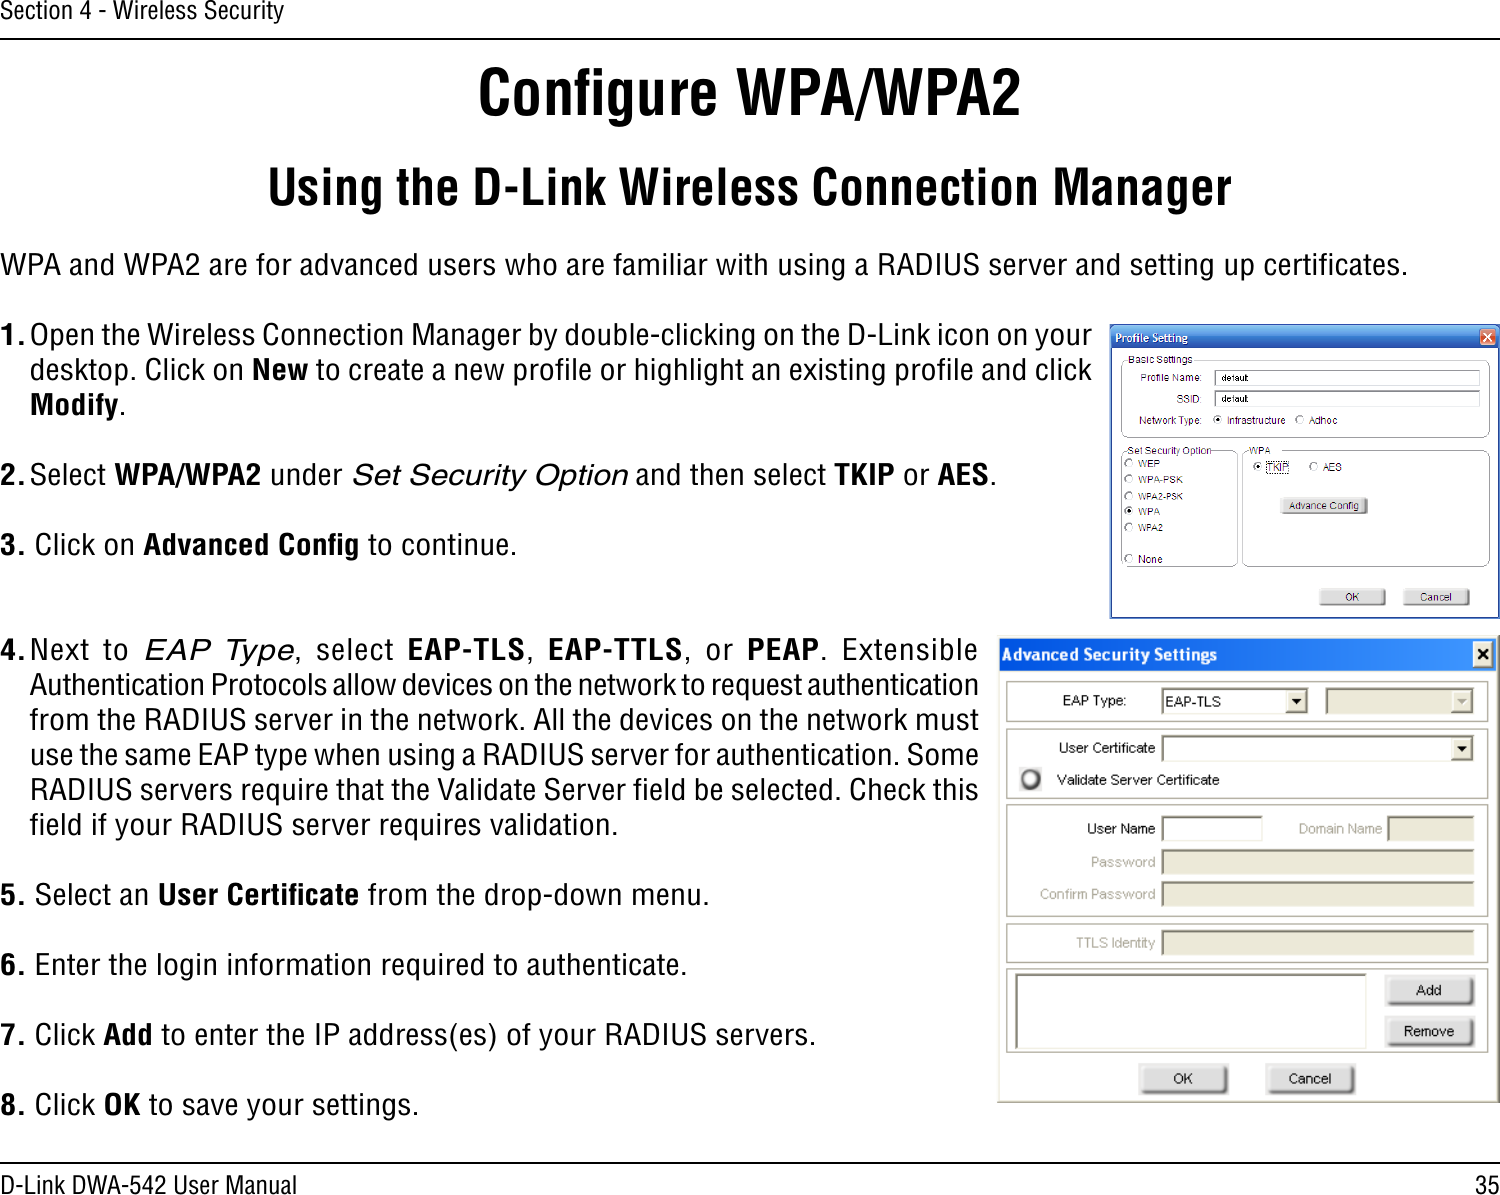 35D-Link DWA-542 User ManualSection 4 - Wireless SecurityConﬁgure WPA/WPA2Using the D-Link Wireless Connection ManagerWPA and WPA2 are for advanced users who are familiar with using a RADIUS server and setting up certiﬁcates.1. Open the Wireless Connection Manager by double-clicking on the D-Link icon on your desktop. Click on New to create a new proﬁle or highlight an existing proﬁle and click Modify. 2. Select WPA/WPA2 under Set Security Option and then select TKIP or AES.3. Click on Advanced Conﬁg to continue.4. Next to EAP Type,  select  EAP-TLS,  EAP-TTLS, or  PEAP.  Extensible Authentication Protocols allow devices on the network to request authentication from the RADIUS server in the network. All the devices on the network must use the same EAP type when using a RADIUS server for authentication. Some RADIUS servers require that the Validate Server ﬁeld be selected. Check this ﬁeld if your RADIUS server requires validation.5. Select an User Certiﬁcate from the drop-down menu.6. Enter the login information required to authenticate.7. Click Add to enter the IP address(es) of your RADIUS servers.8. Click OK to save your settings.